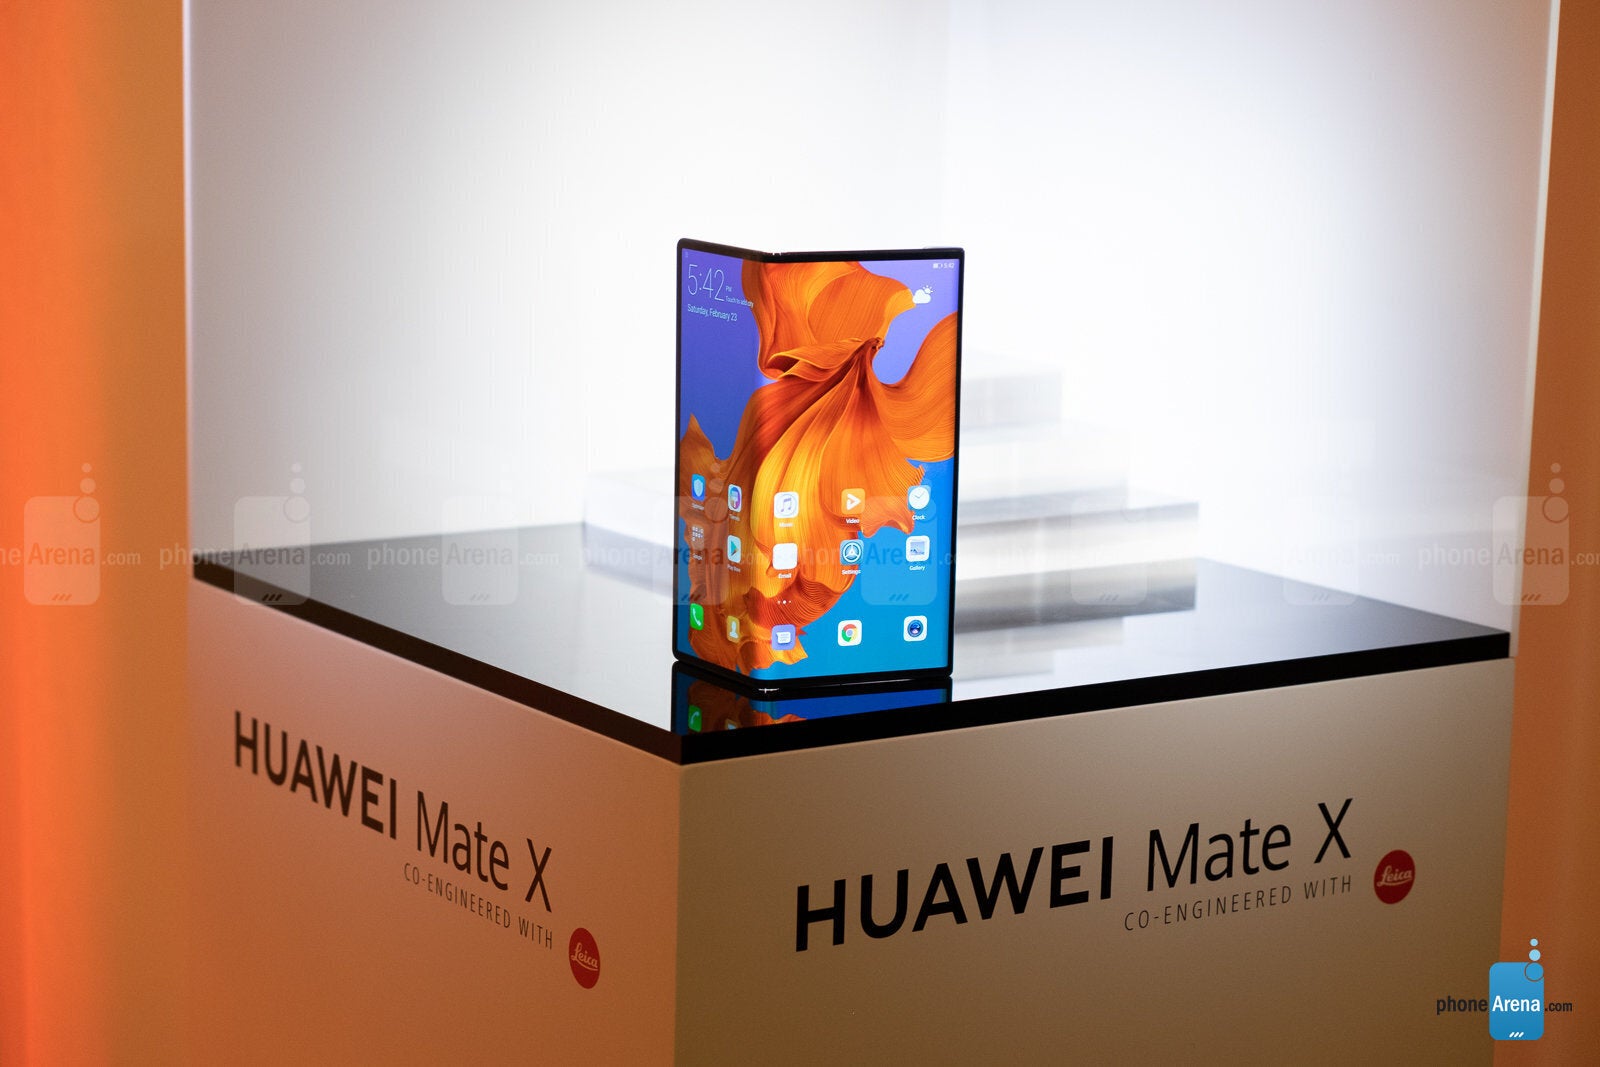 The Huawei Mate X is no longer expected to beat the Galaxy Fold to market